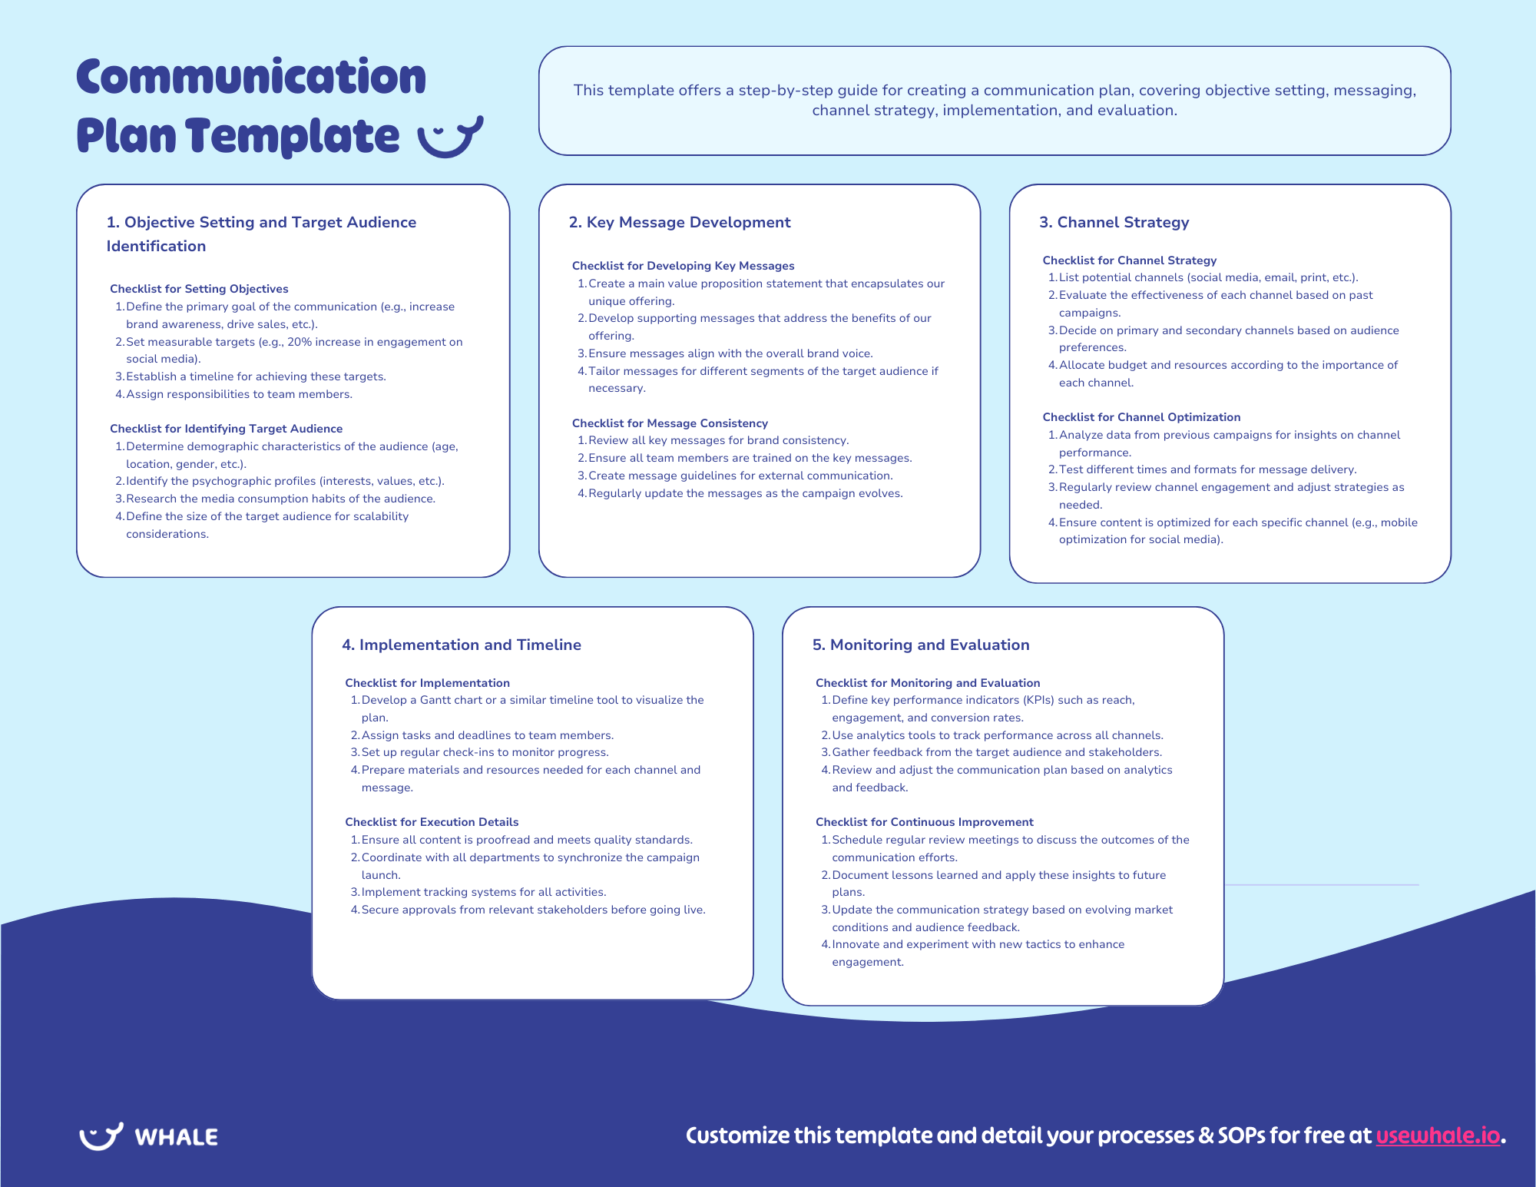 A communication plan template infographic with sections for objective setting, key messages, channel strategy, implementation, monitoring, and customization link.